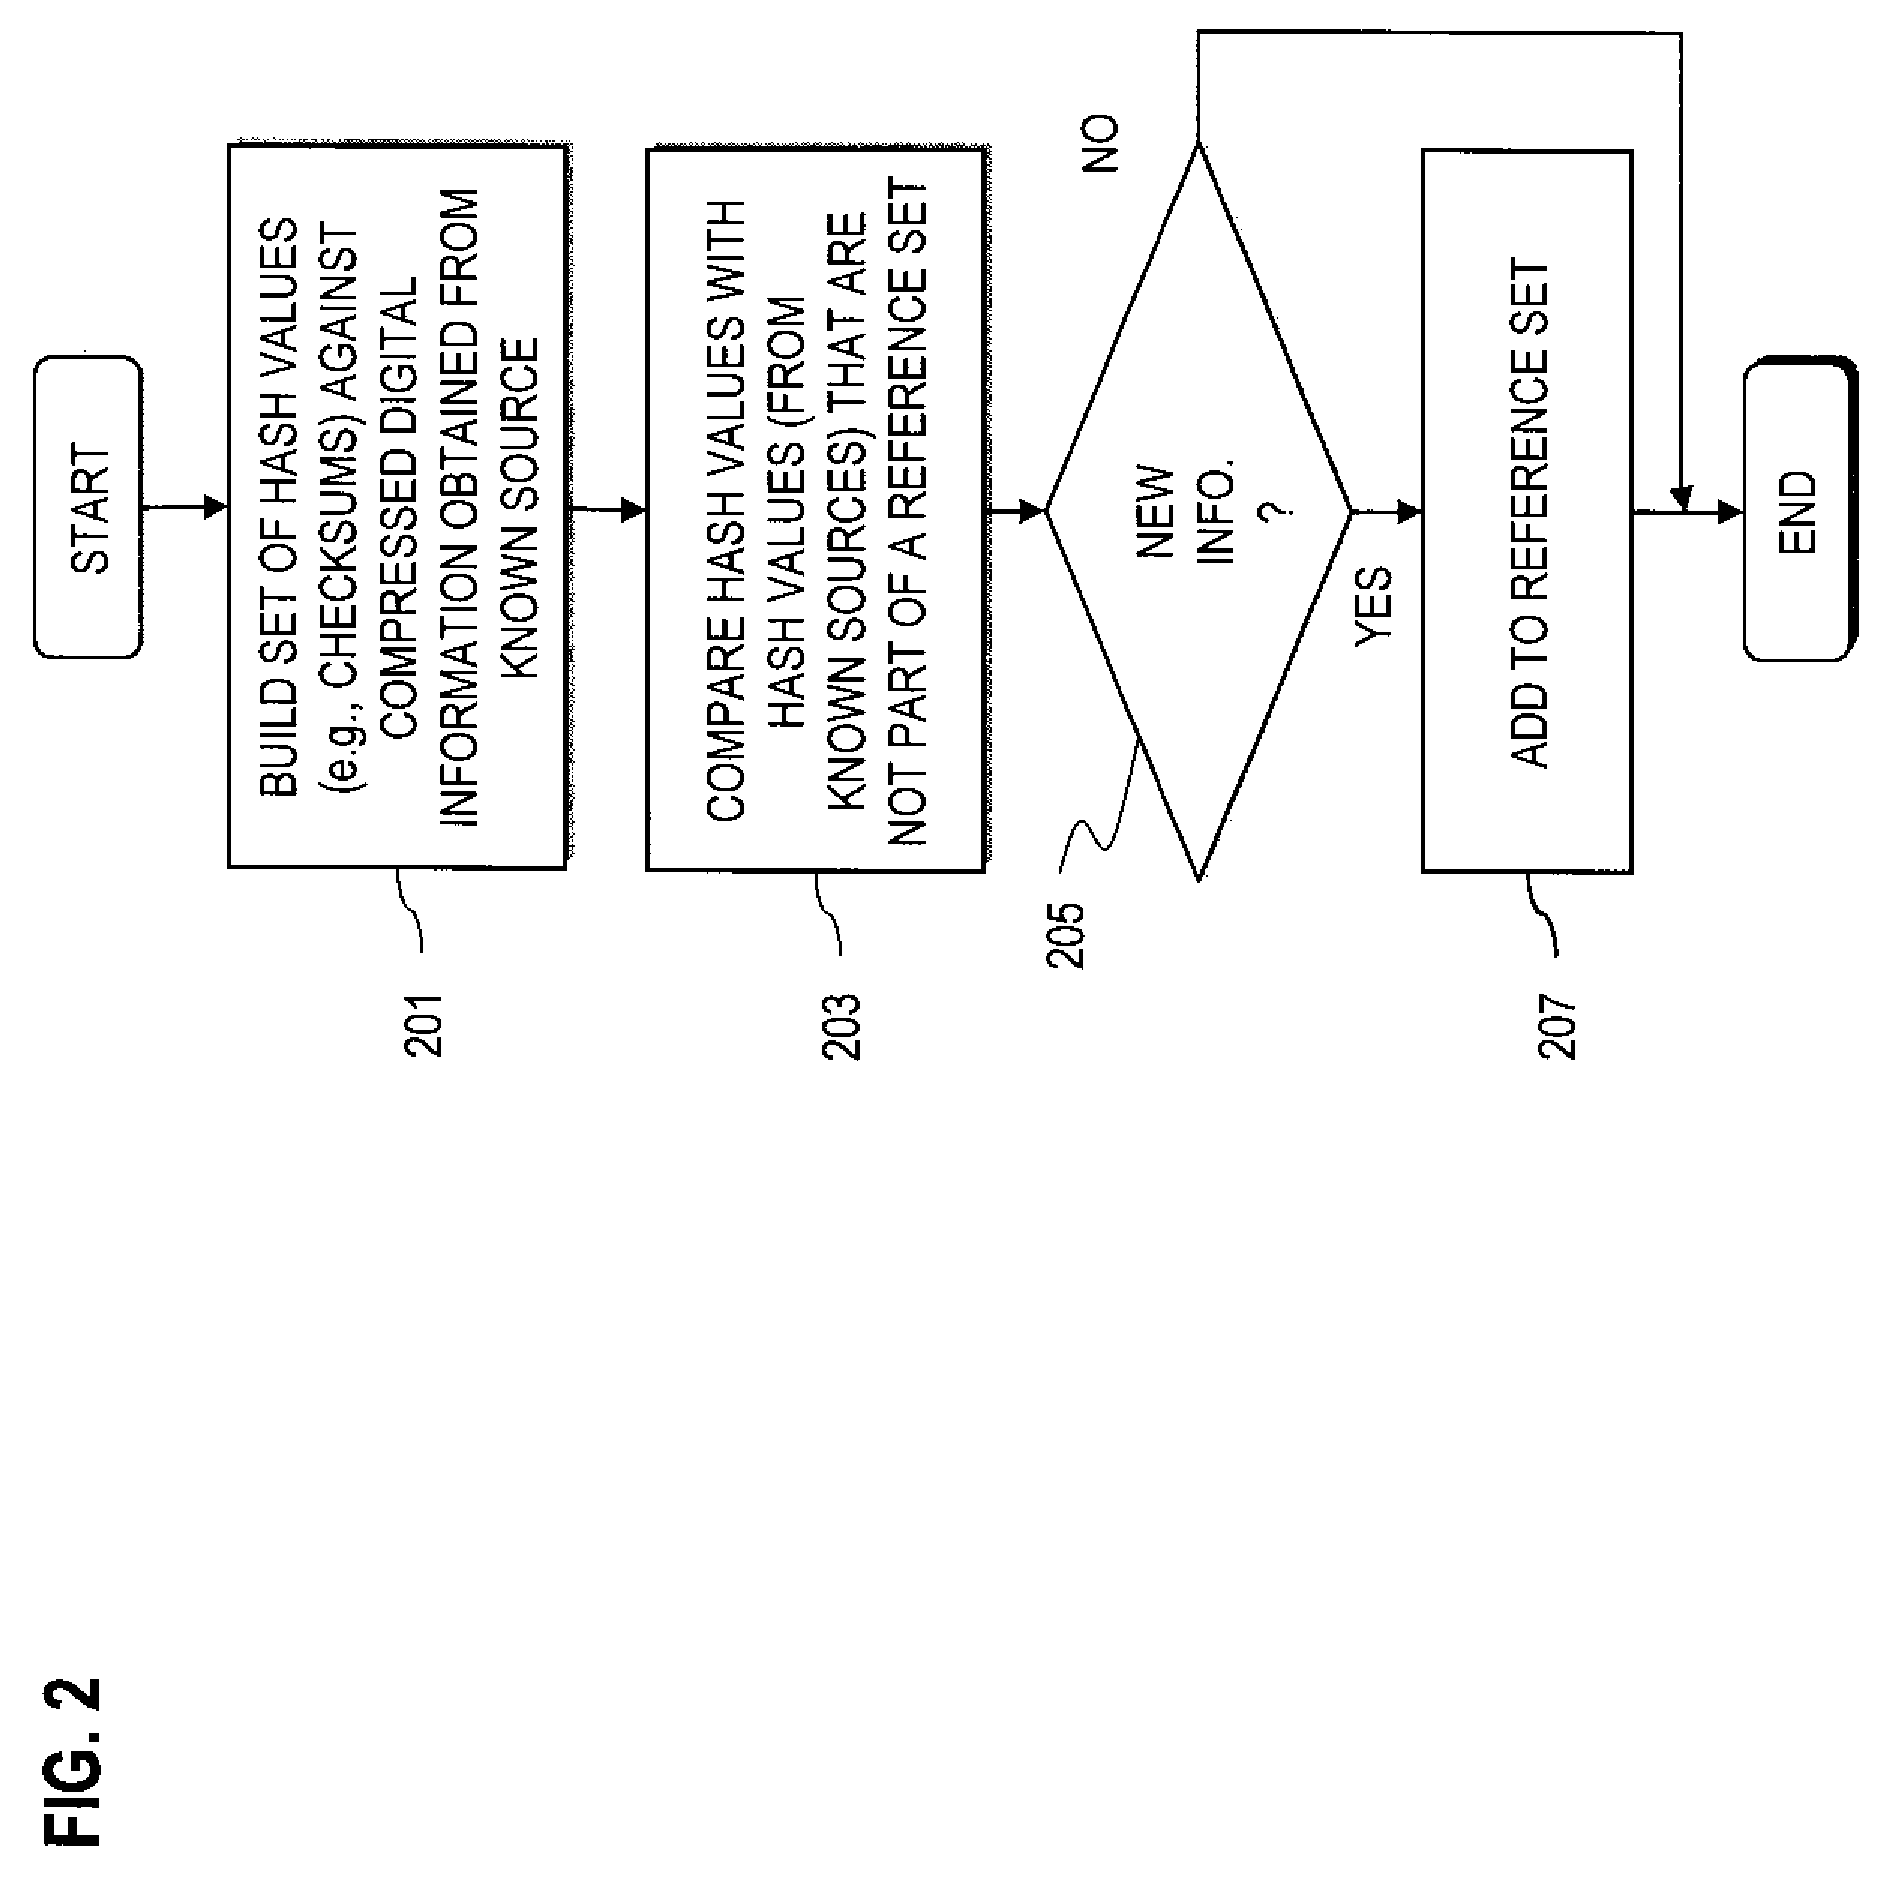 Method and system for providing image processing to track digital information